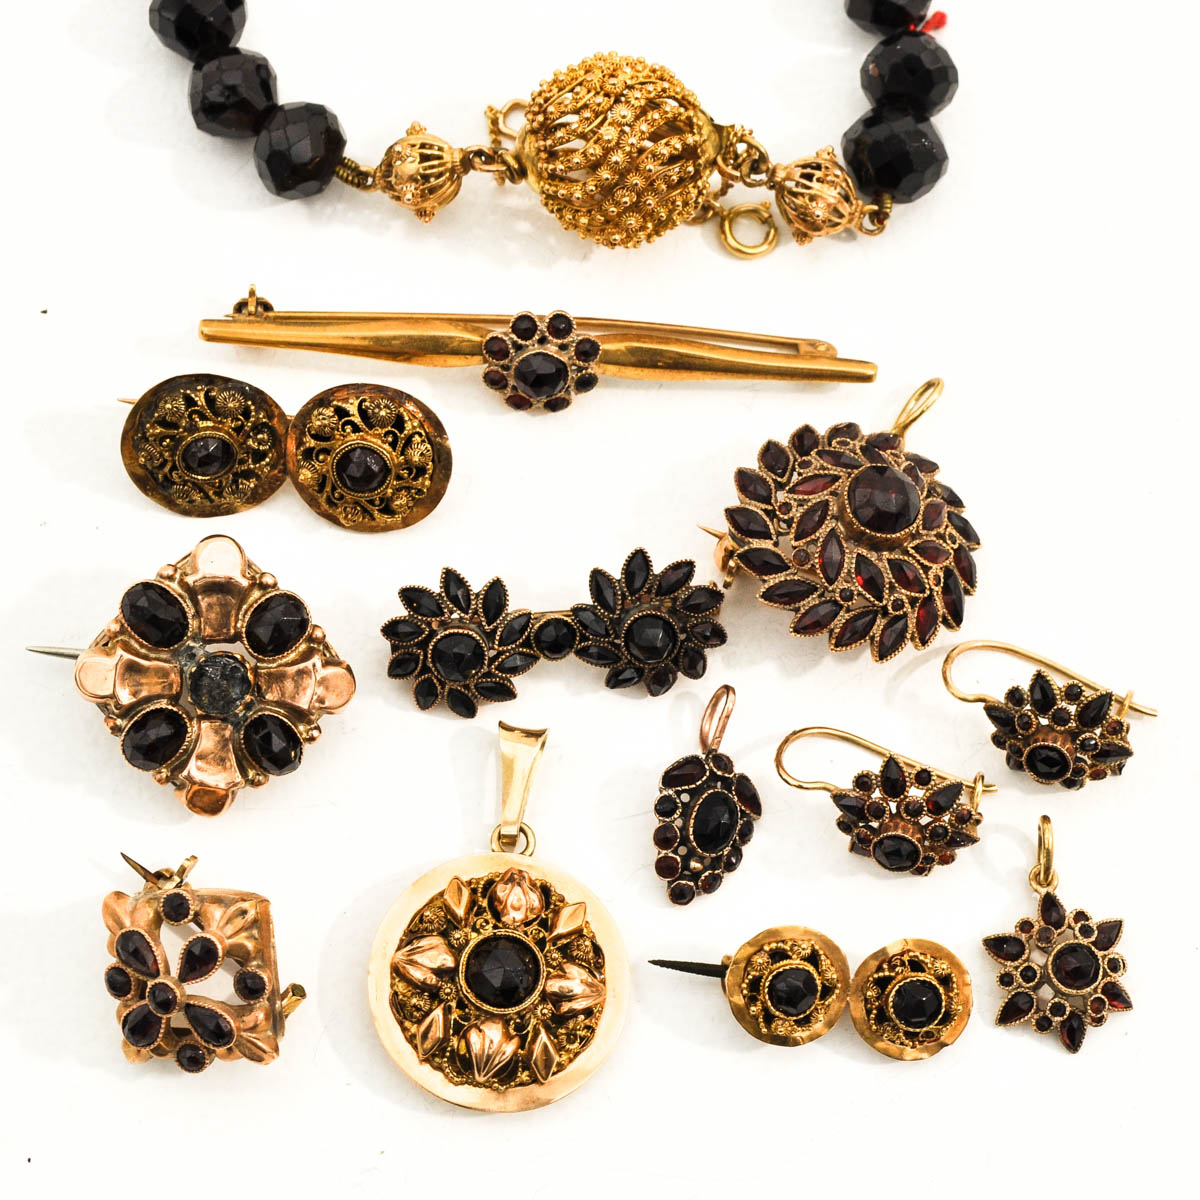 A Diverse Collection of Jewelry - Image 2 of 2